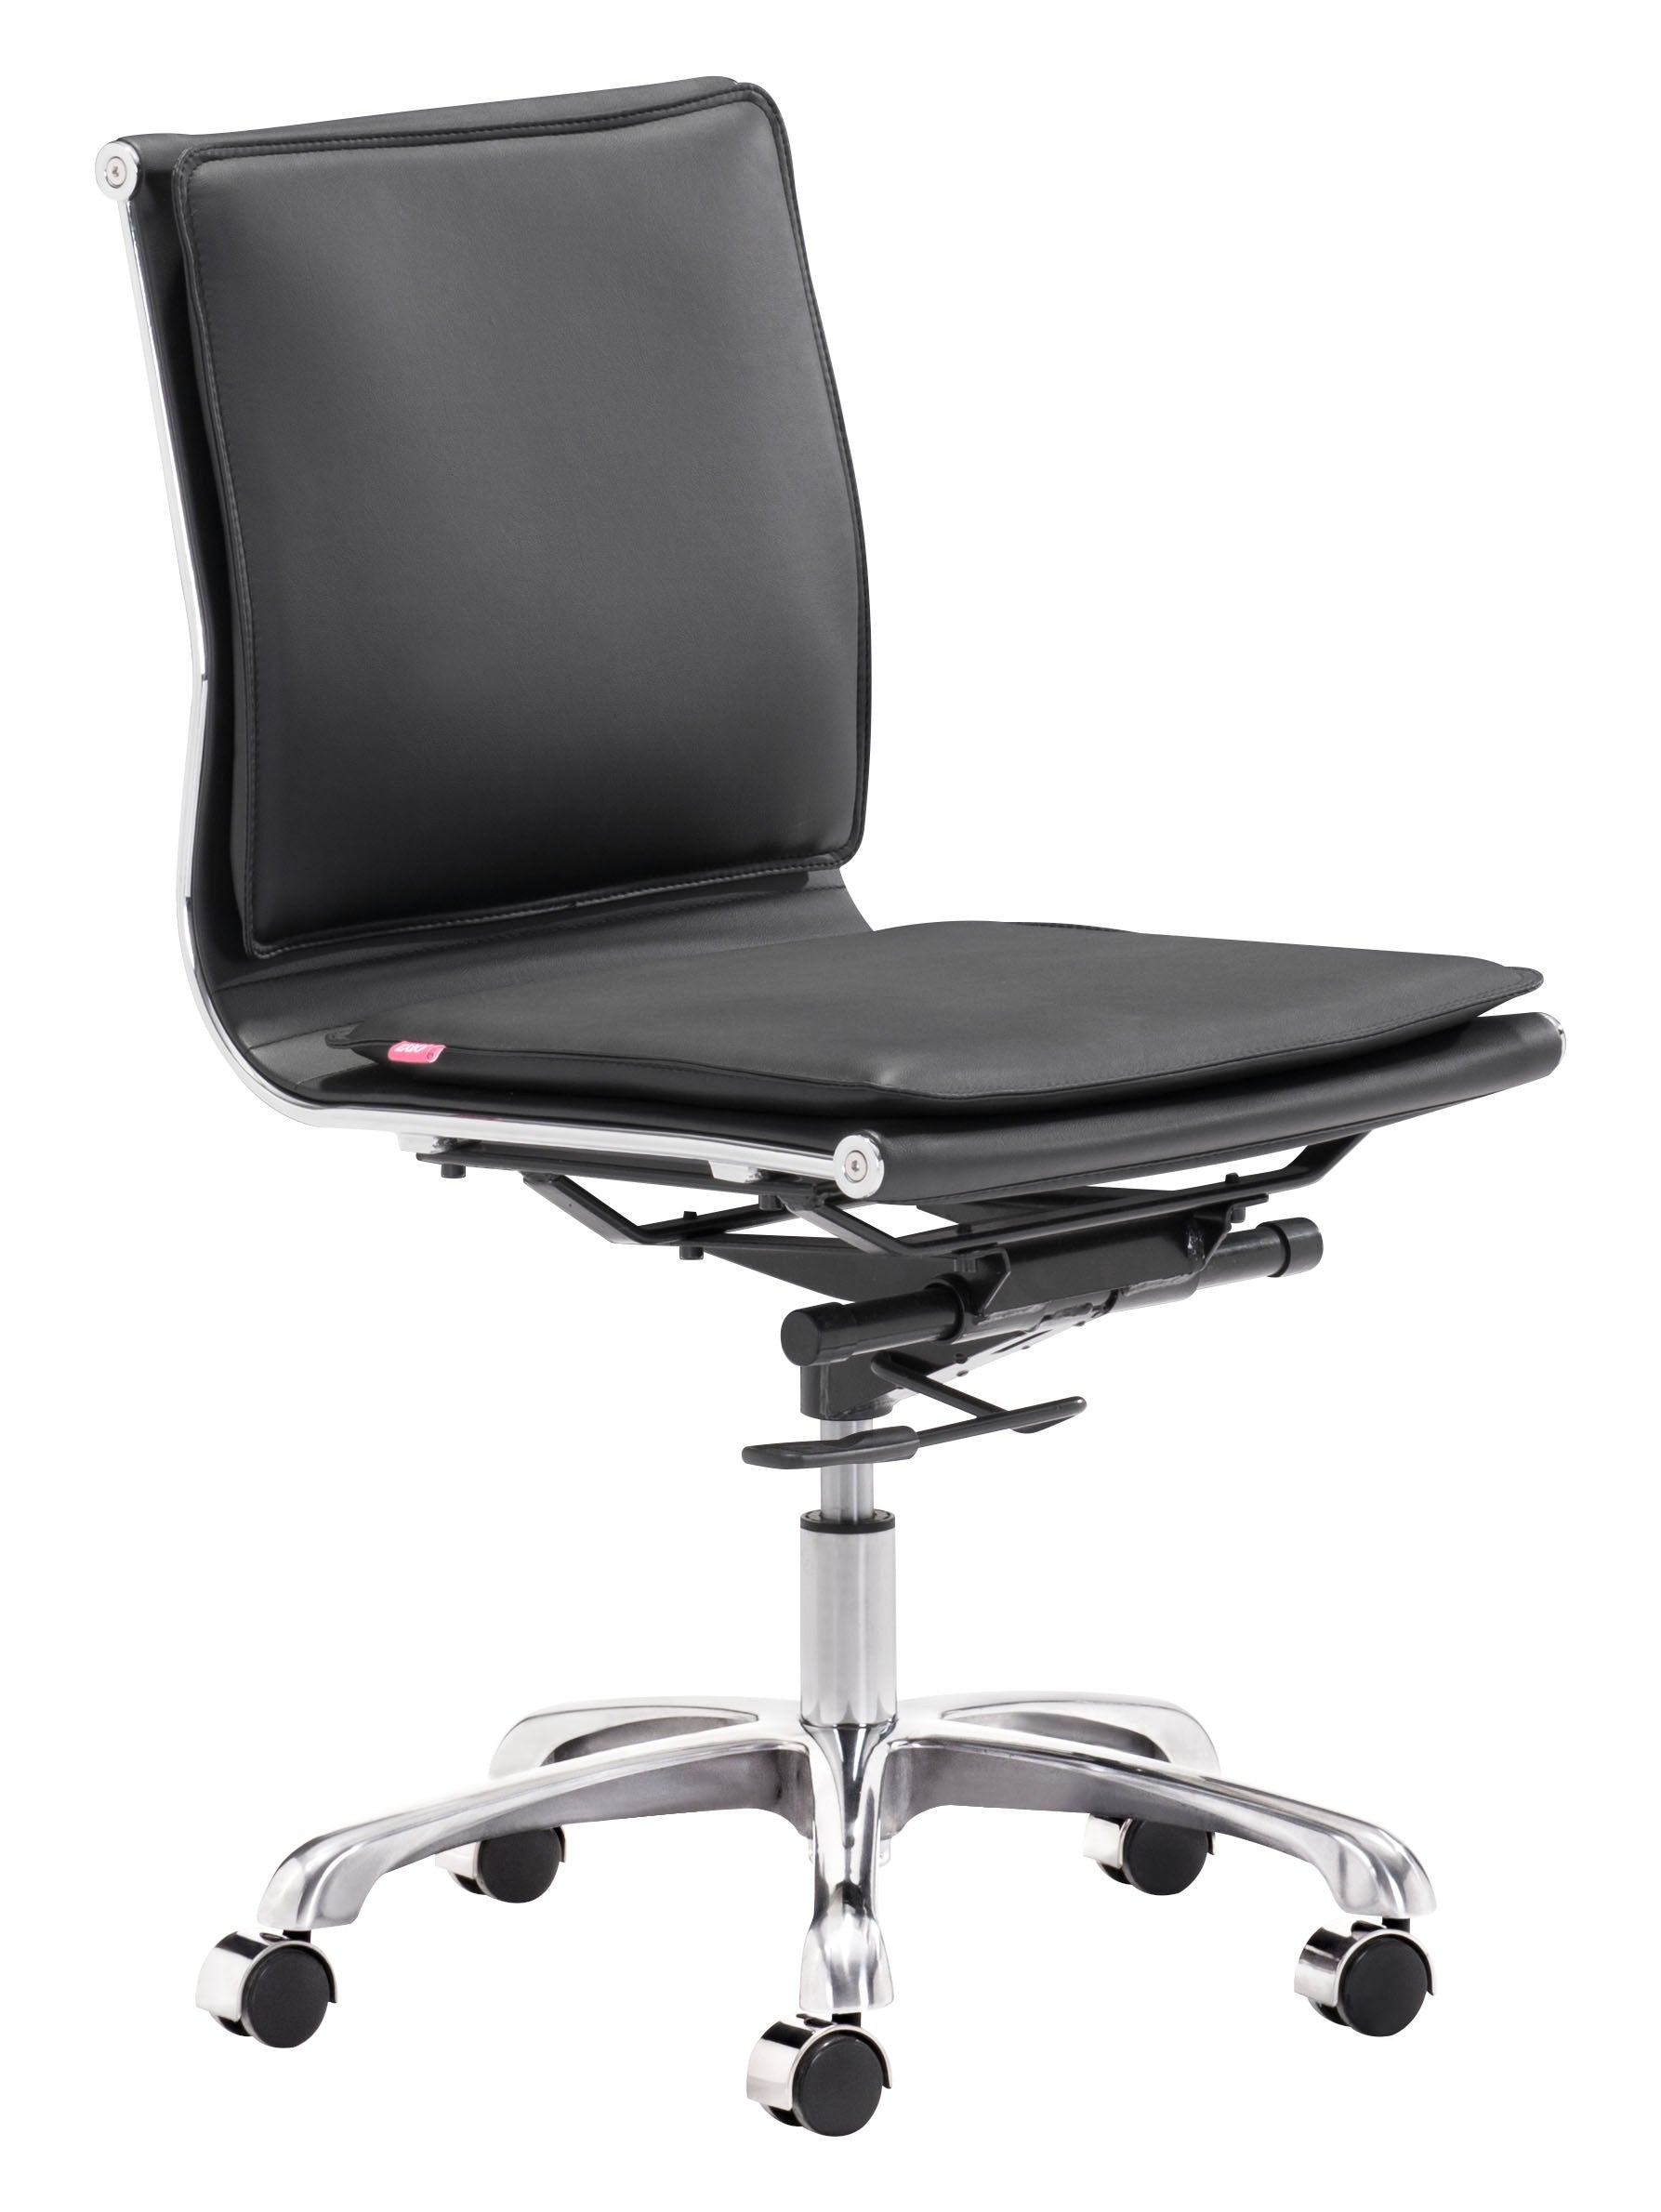 Black and Silver Adjustable Swivel Metal Rolling Executive Office Chair